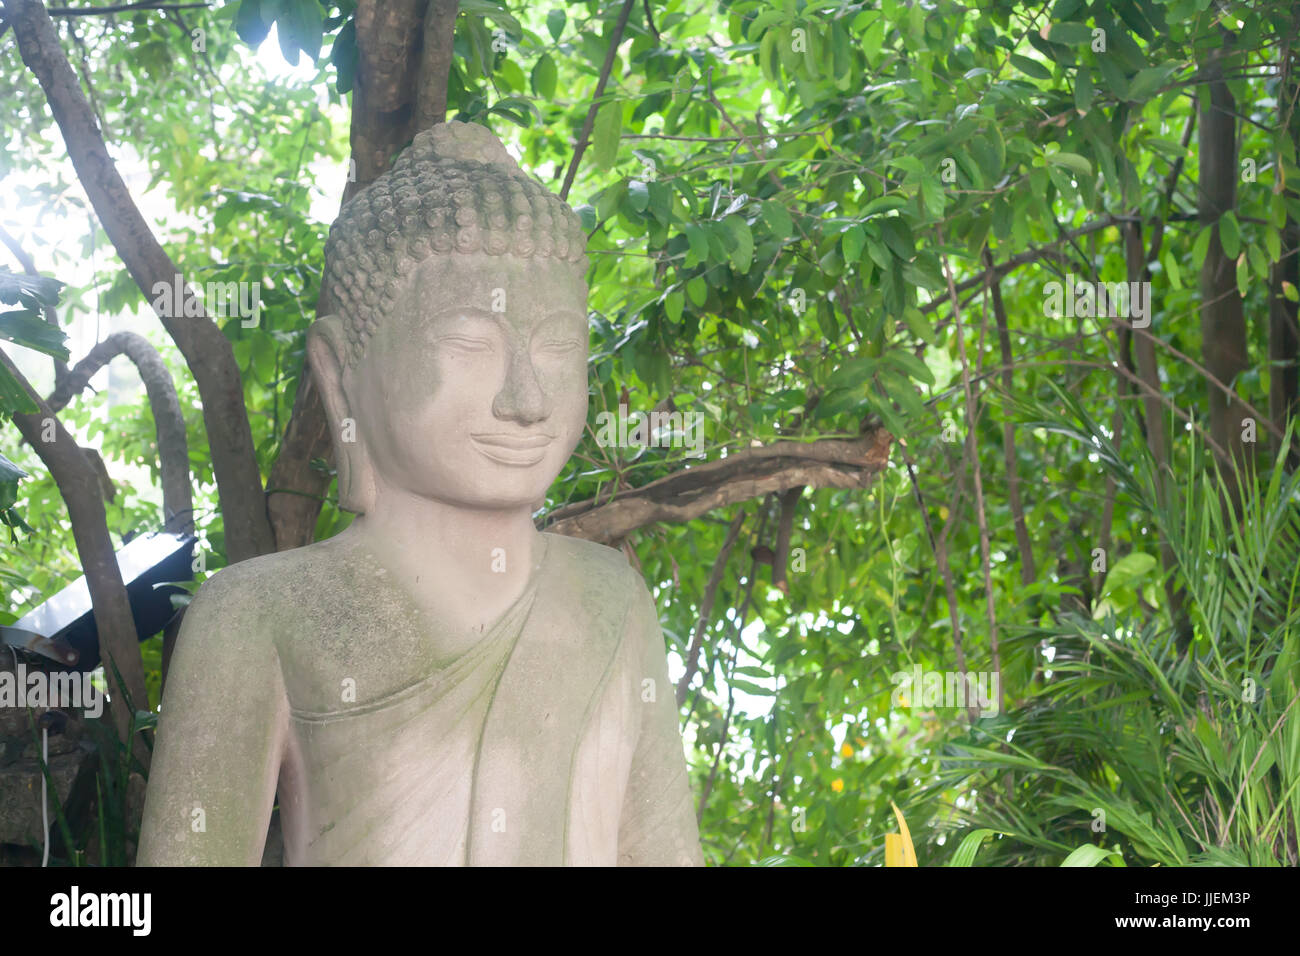 Meditative Ancient Buddha Statue Portrait close up in Cambodian Temple Green Plants with big leaves Stock Photo